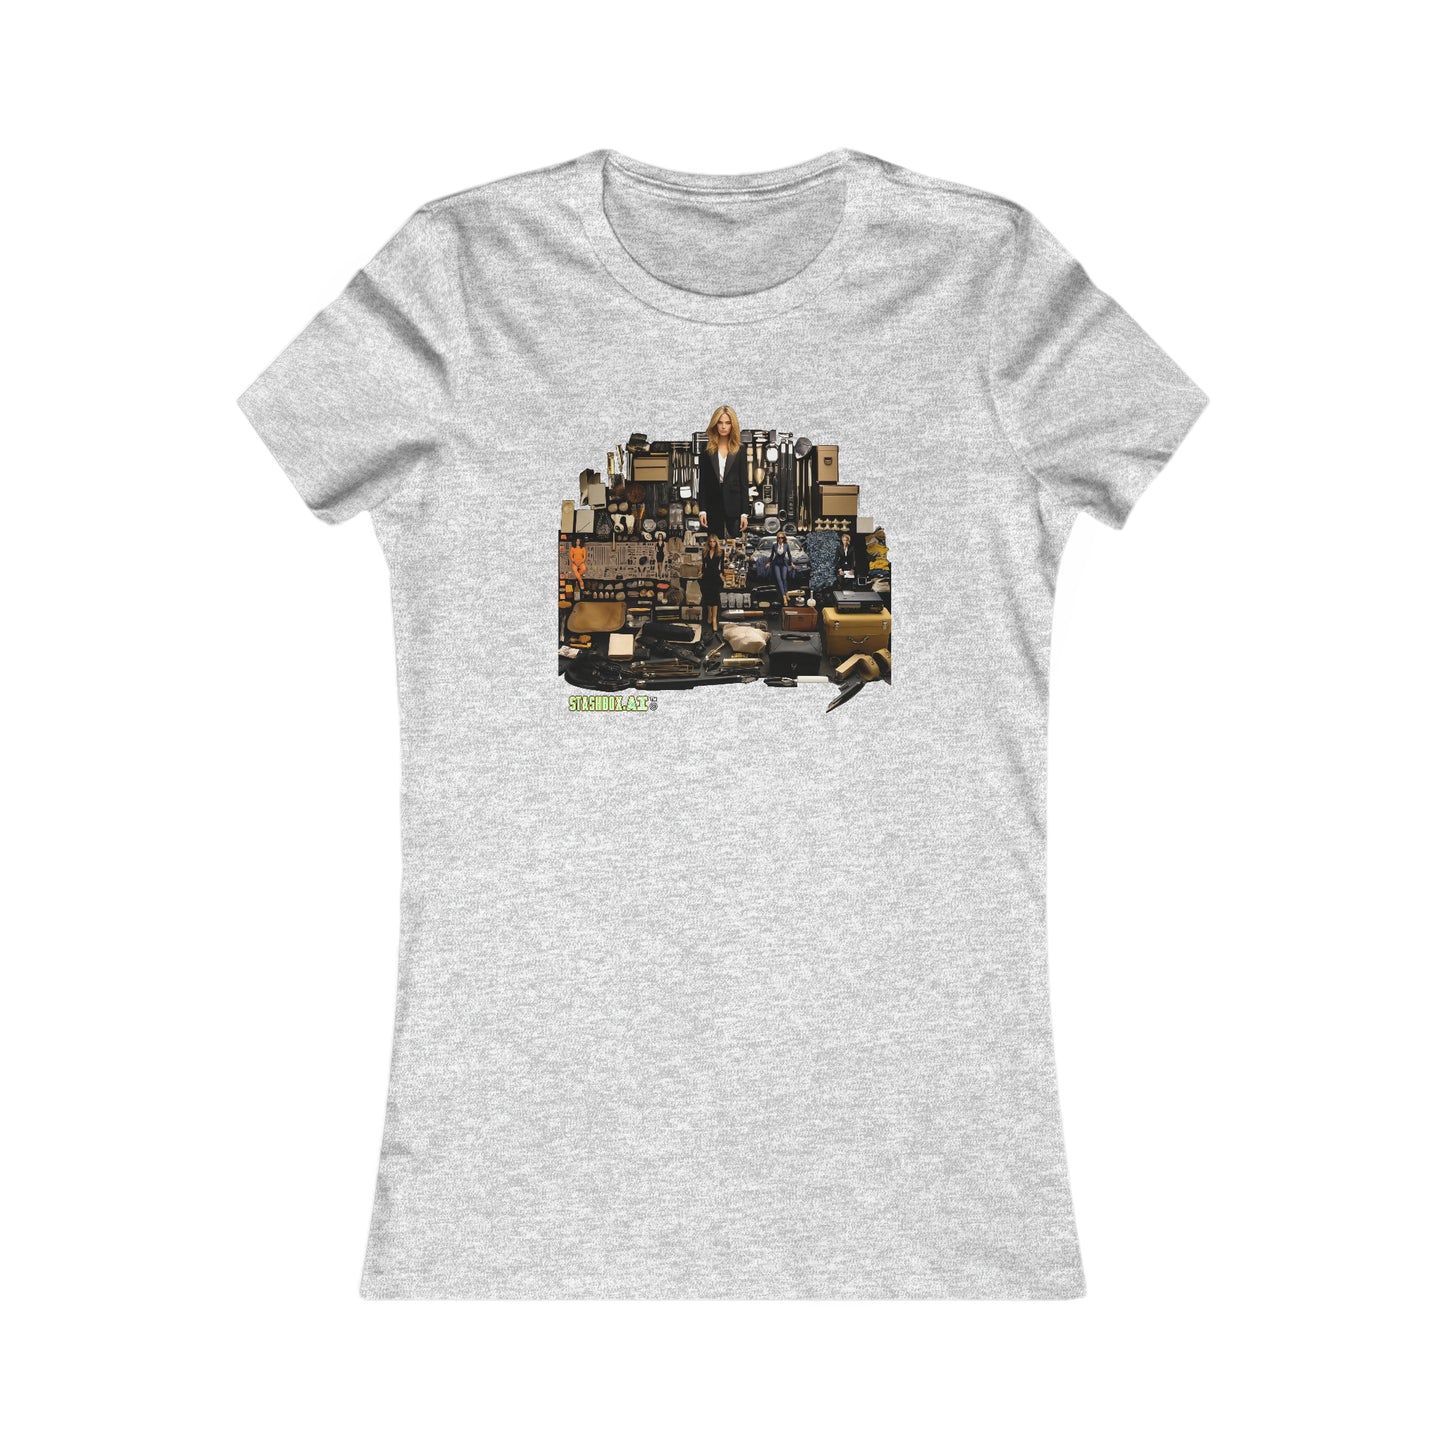 Women's Favorite T-Shirt A Girl and her Makeup Knolling Art Style